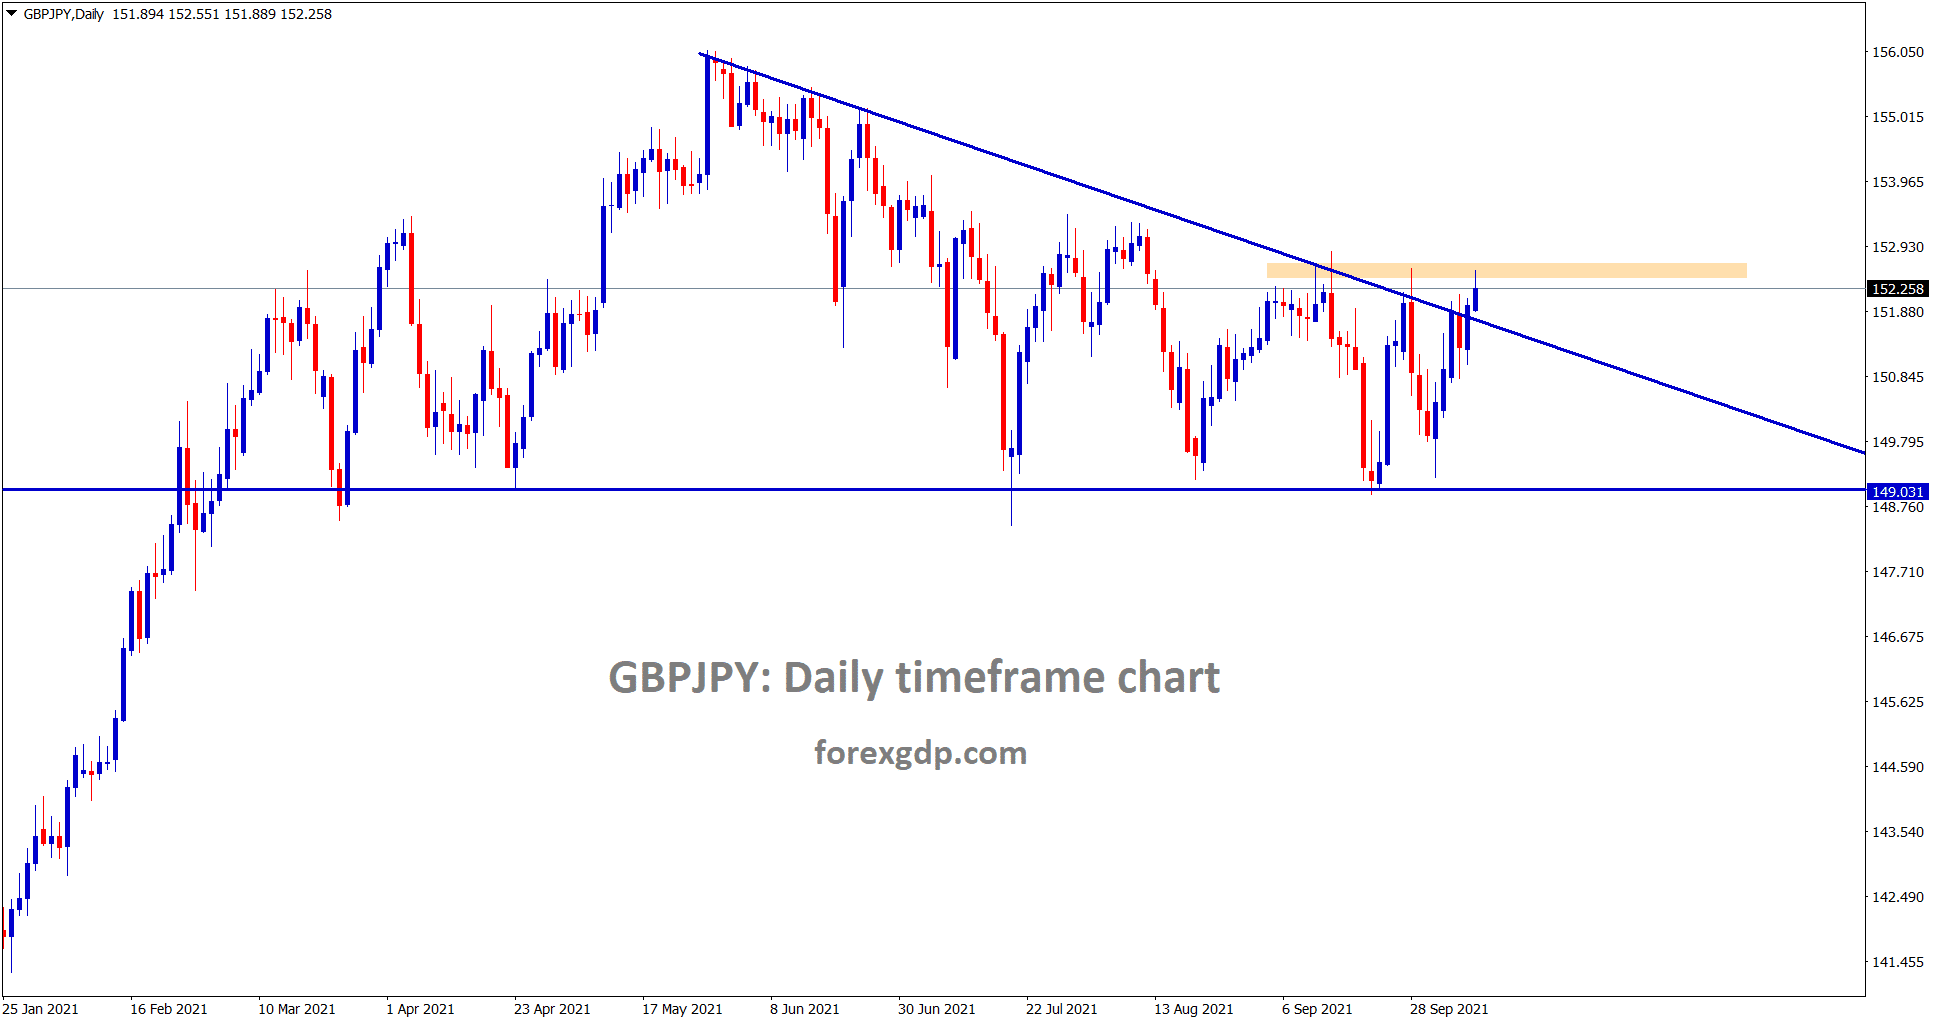 GBPJPY is breaking the top of the descending channel